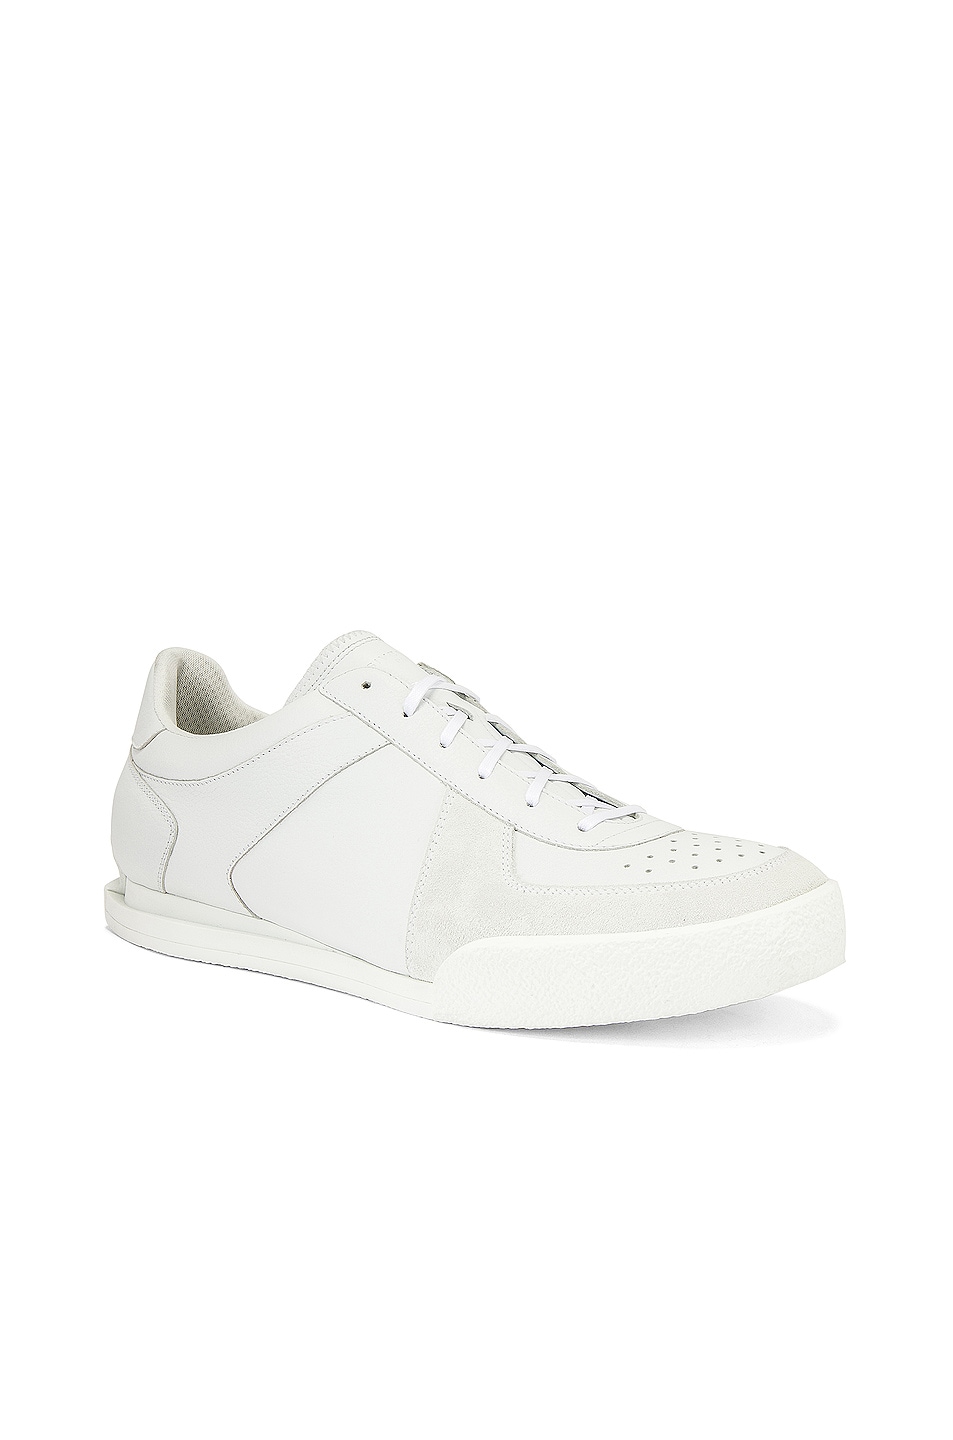 Image 1 of Givenchy Set3 Low Top Sneaker in White